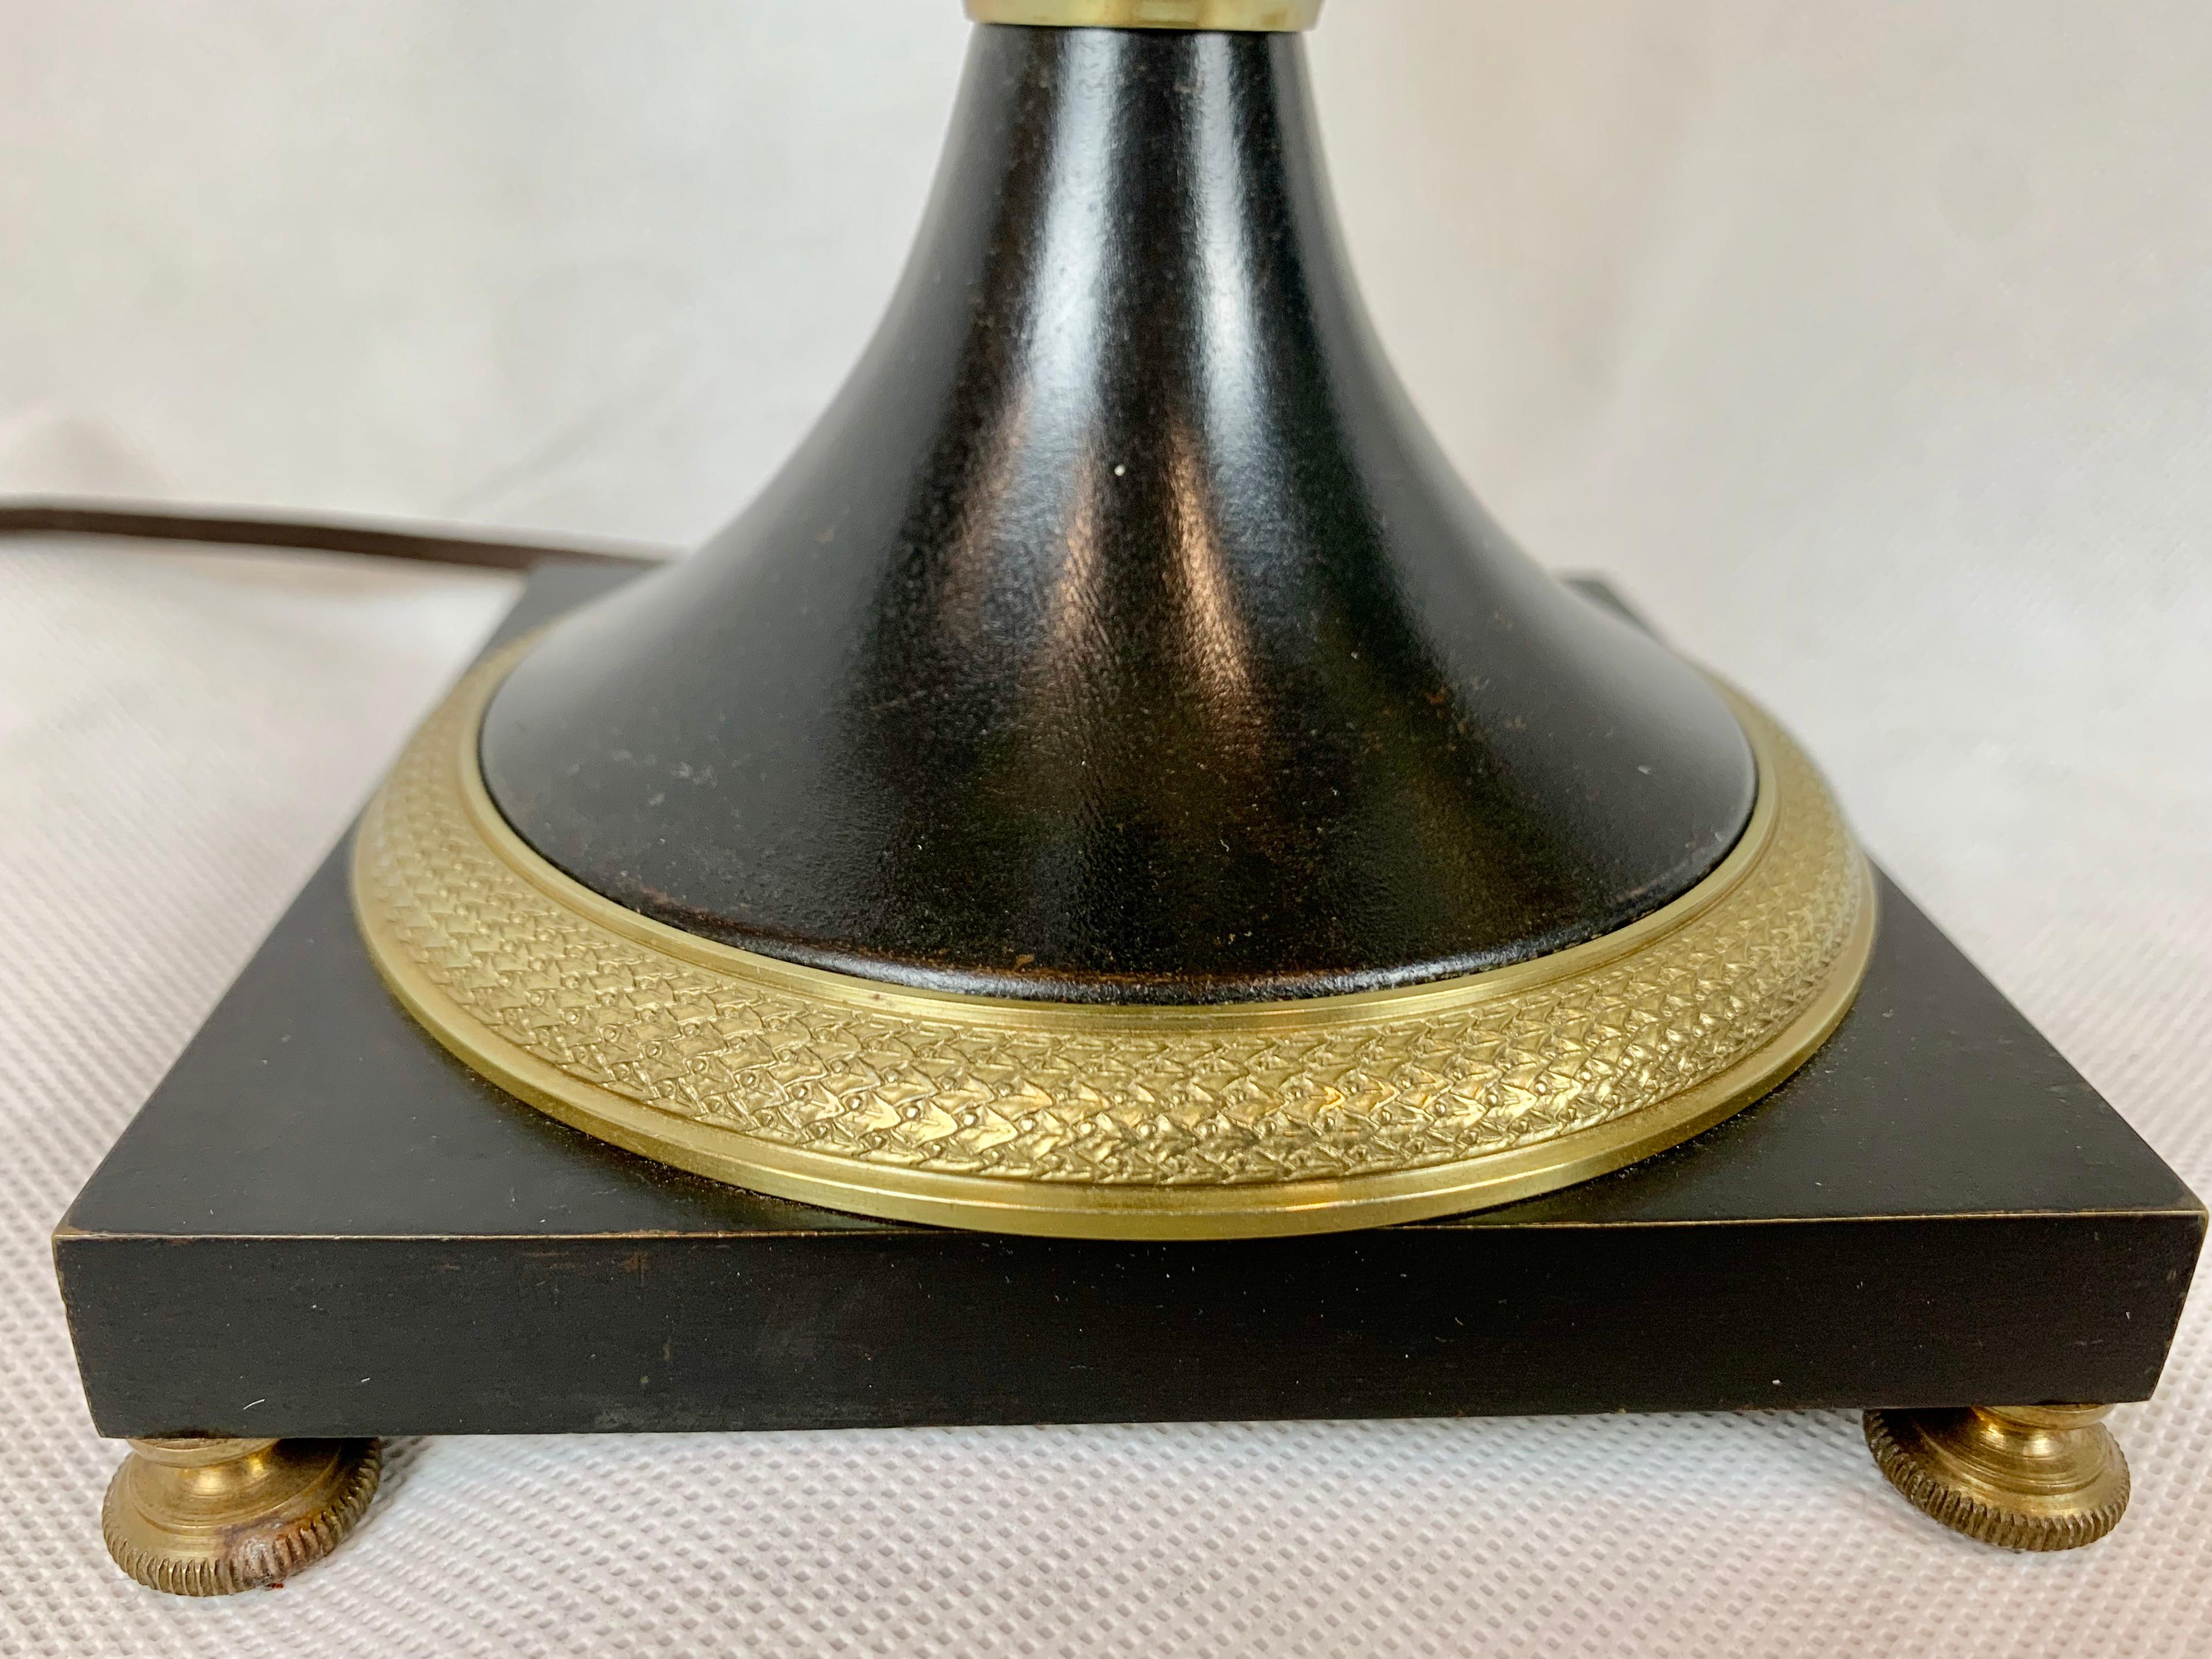 Early 20th Century A Pair of French Empire Black Enameled Lamps with Gilt Bronze Trim